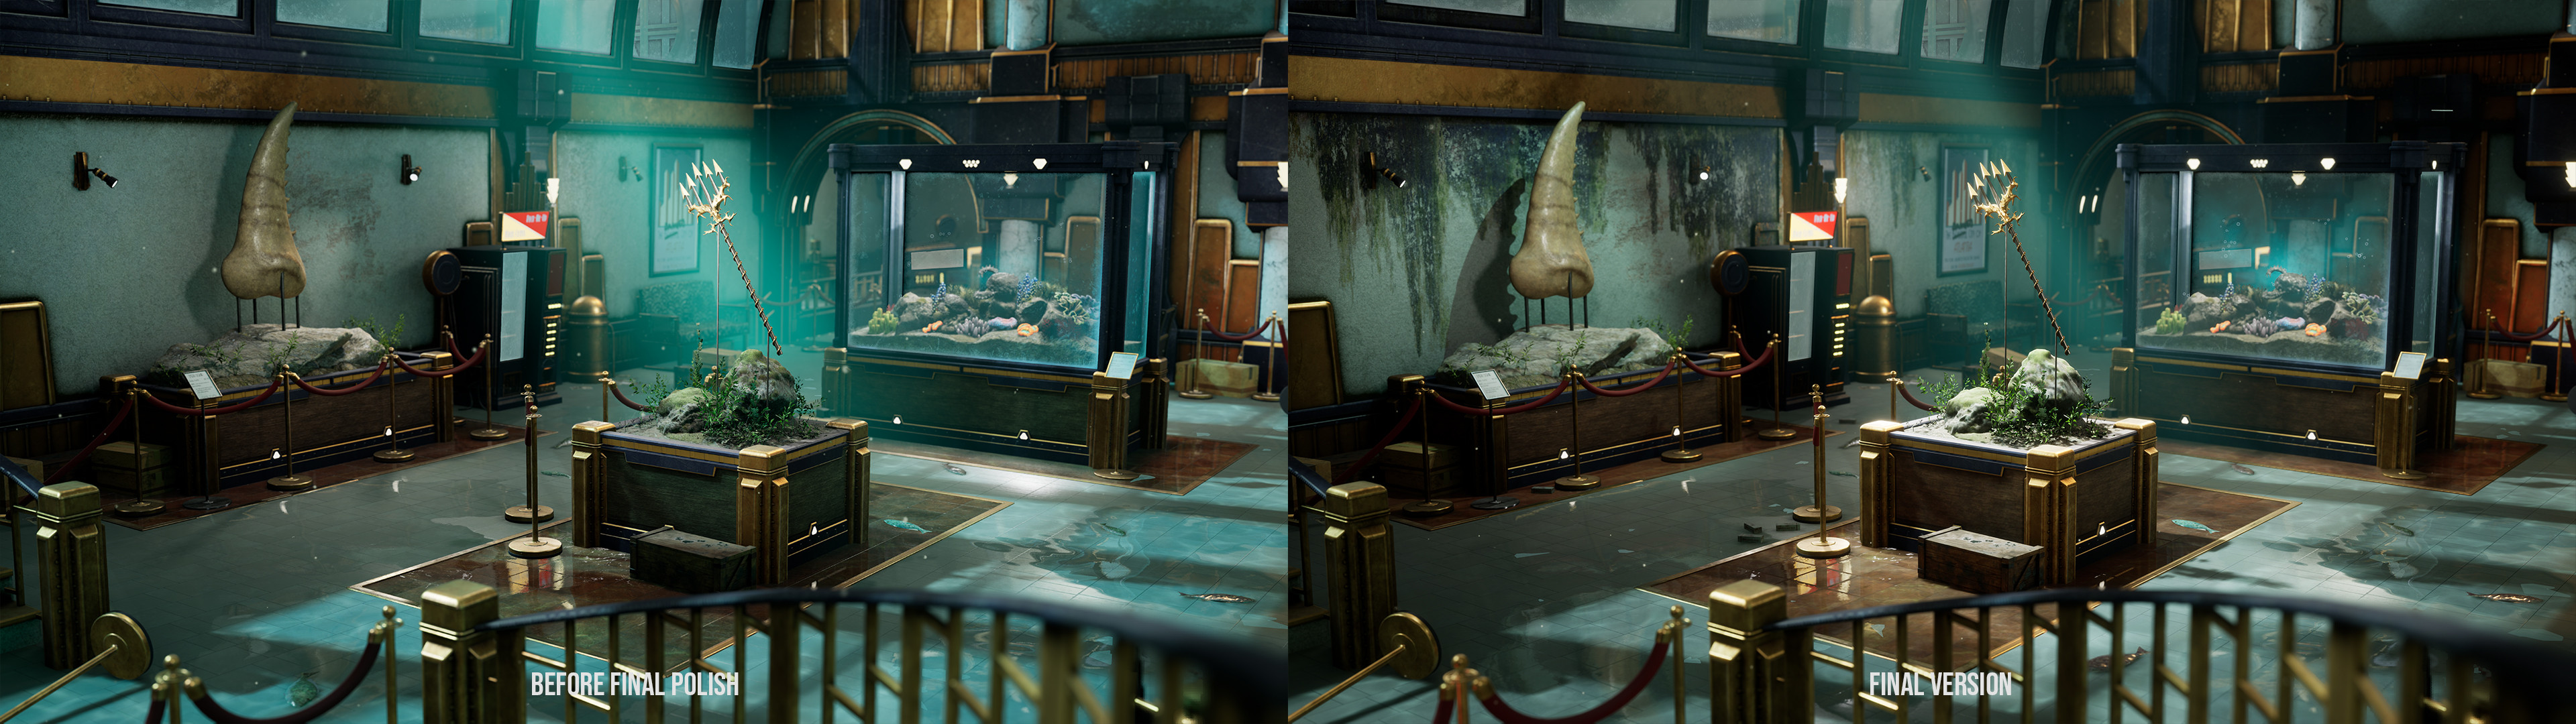 When I finished this environment for my class, the left image was the finished result. After the class ended I knew I wanted to push it a tad further, with additional polishing of the lighting and setdressing (with addition of moldy/leaky decals)